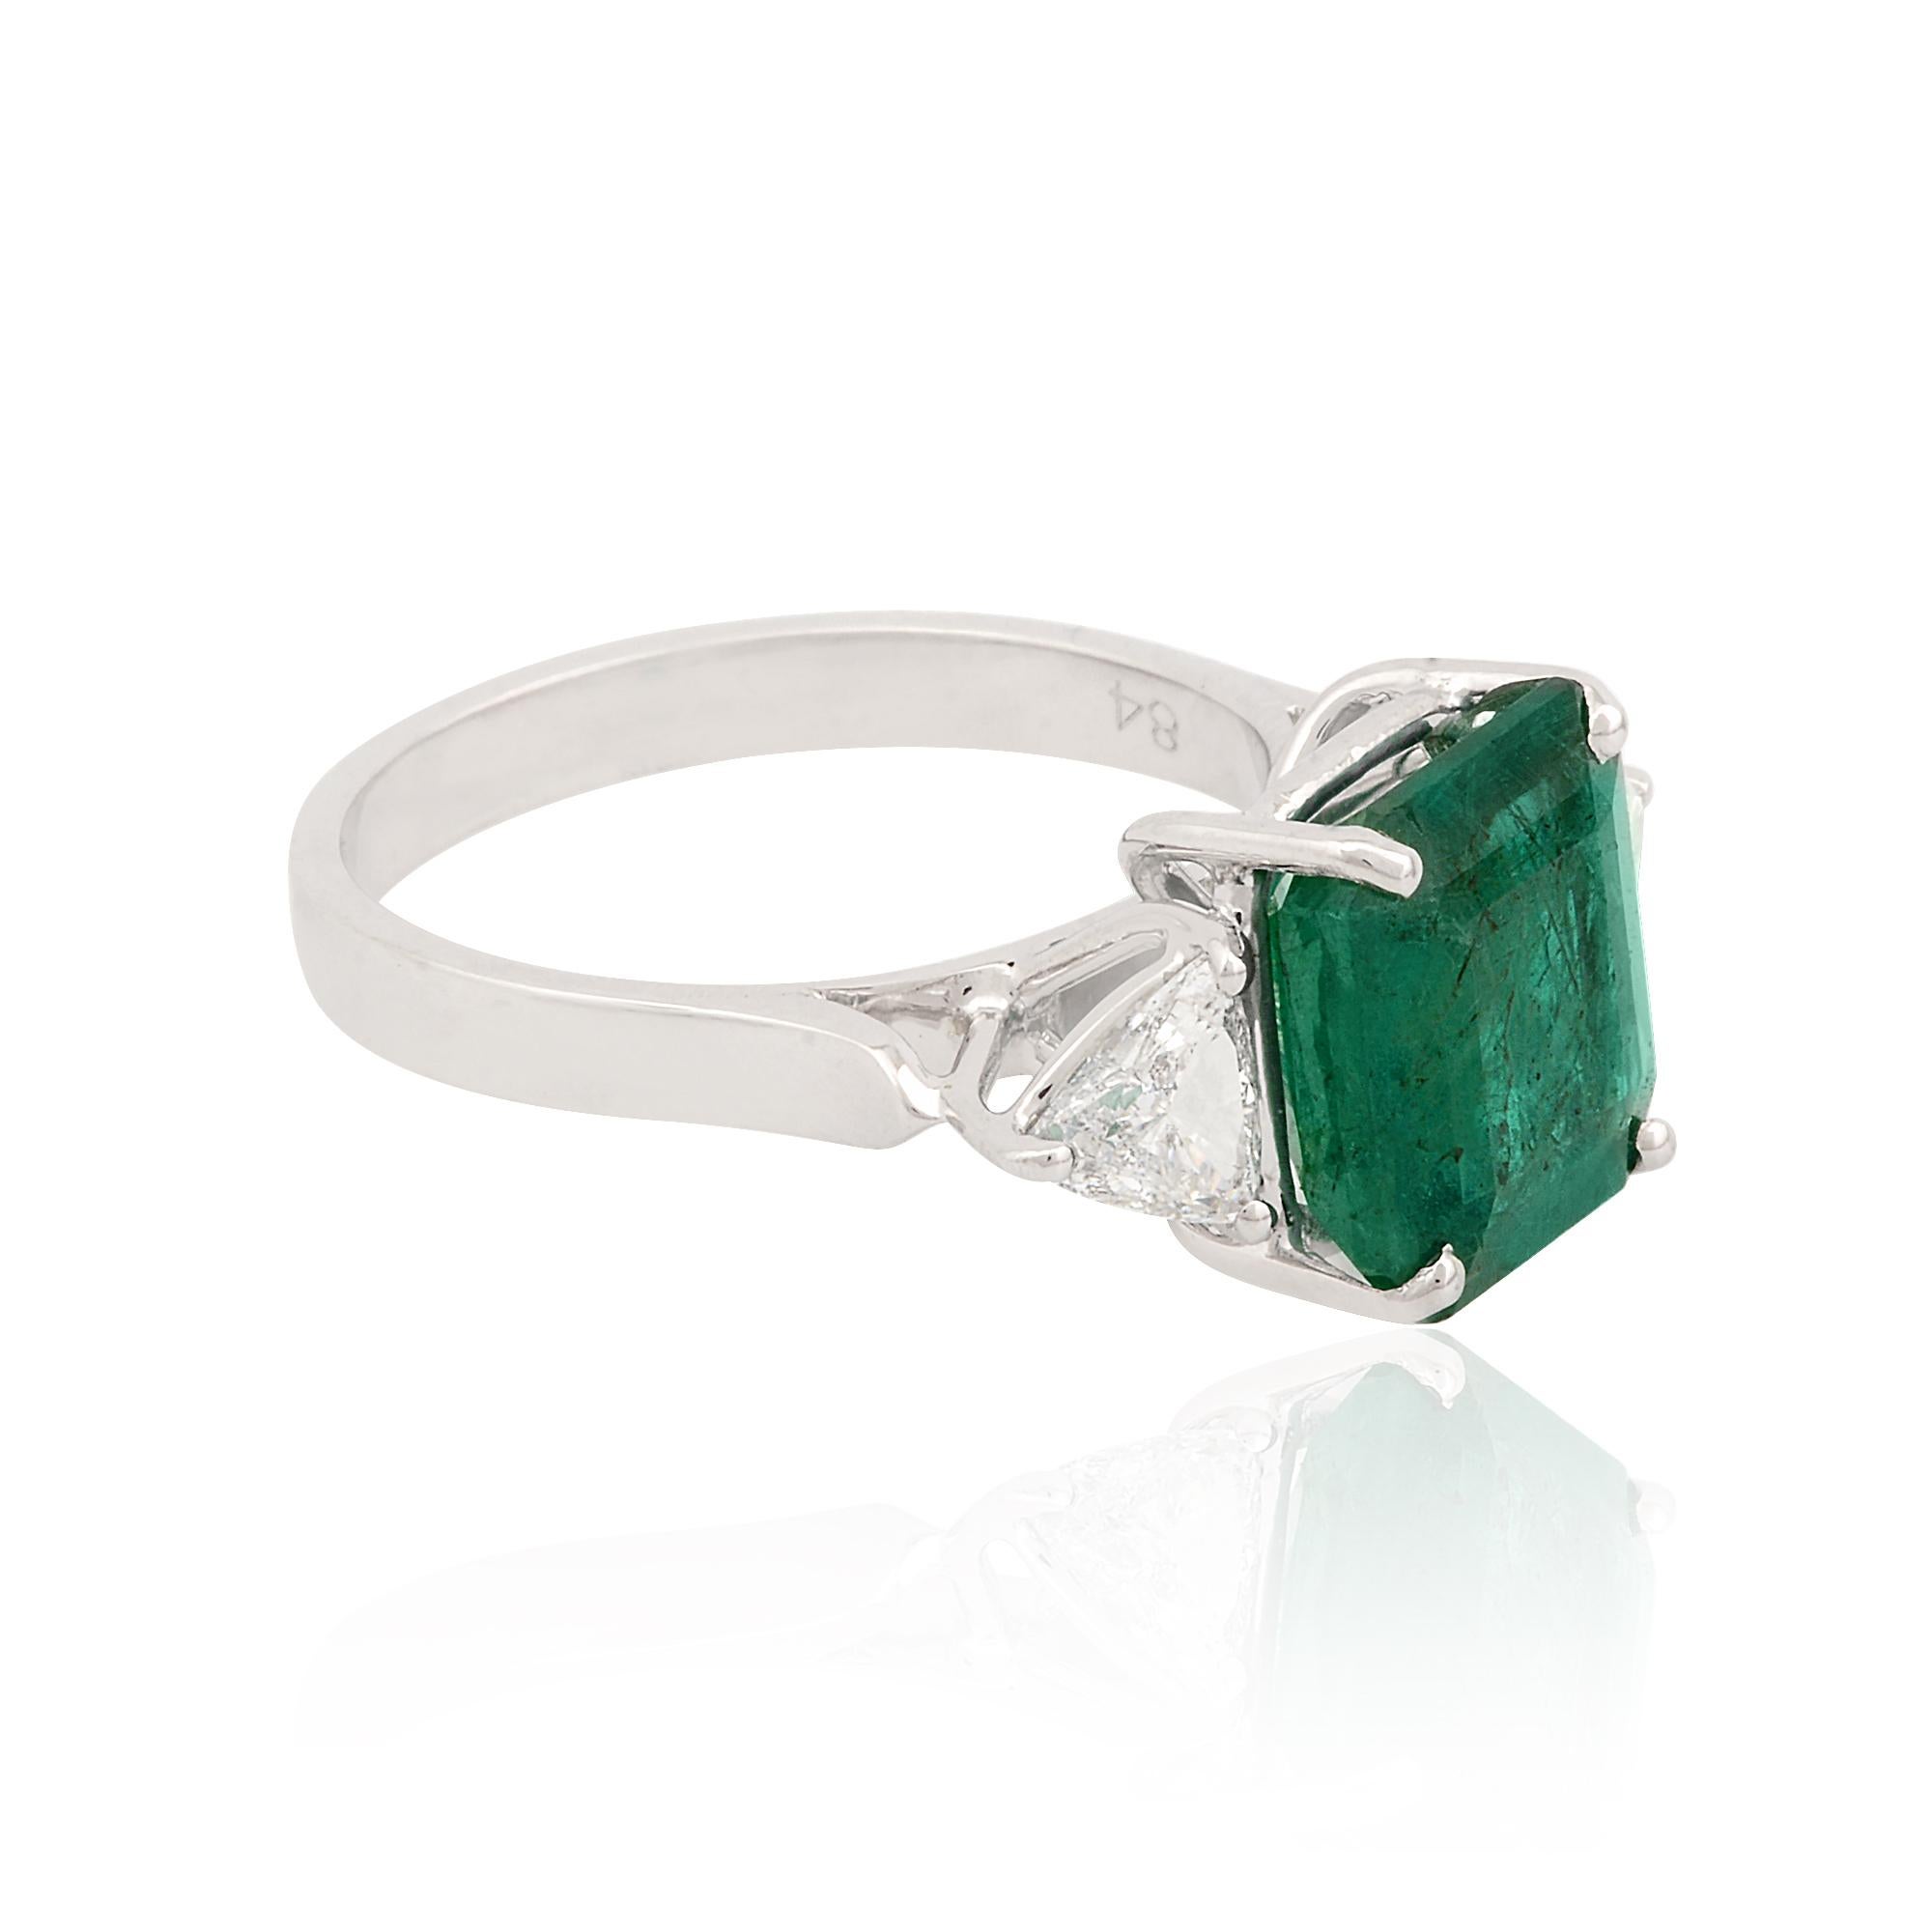 Natural Emerald Gemstone Cocktail Ring Pear Diamond Solid 18k White Gold Jewelry 2